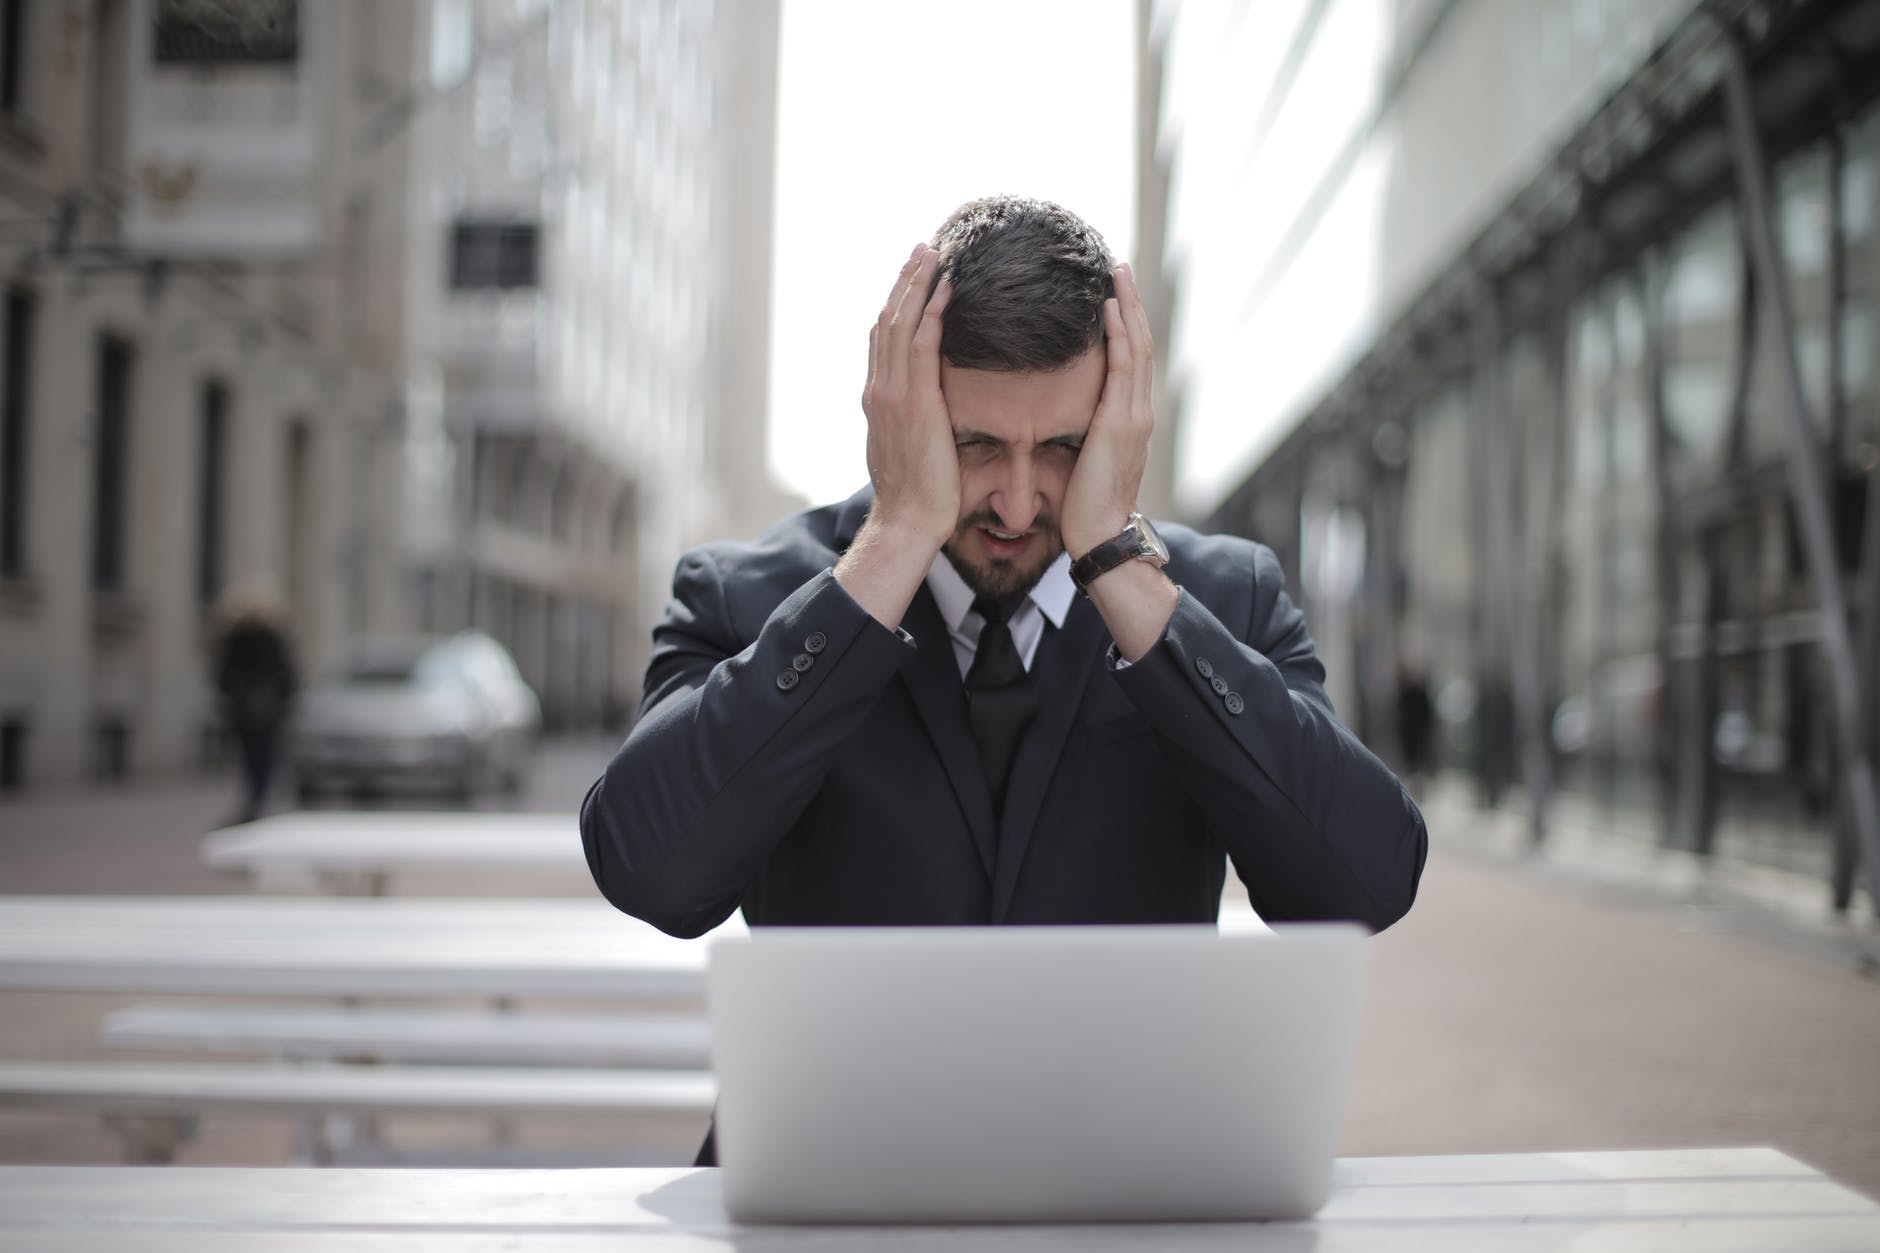 Stressed man in a suit in front of his laptop | Source: Pexels